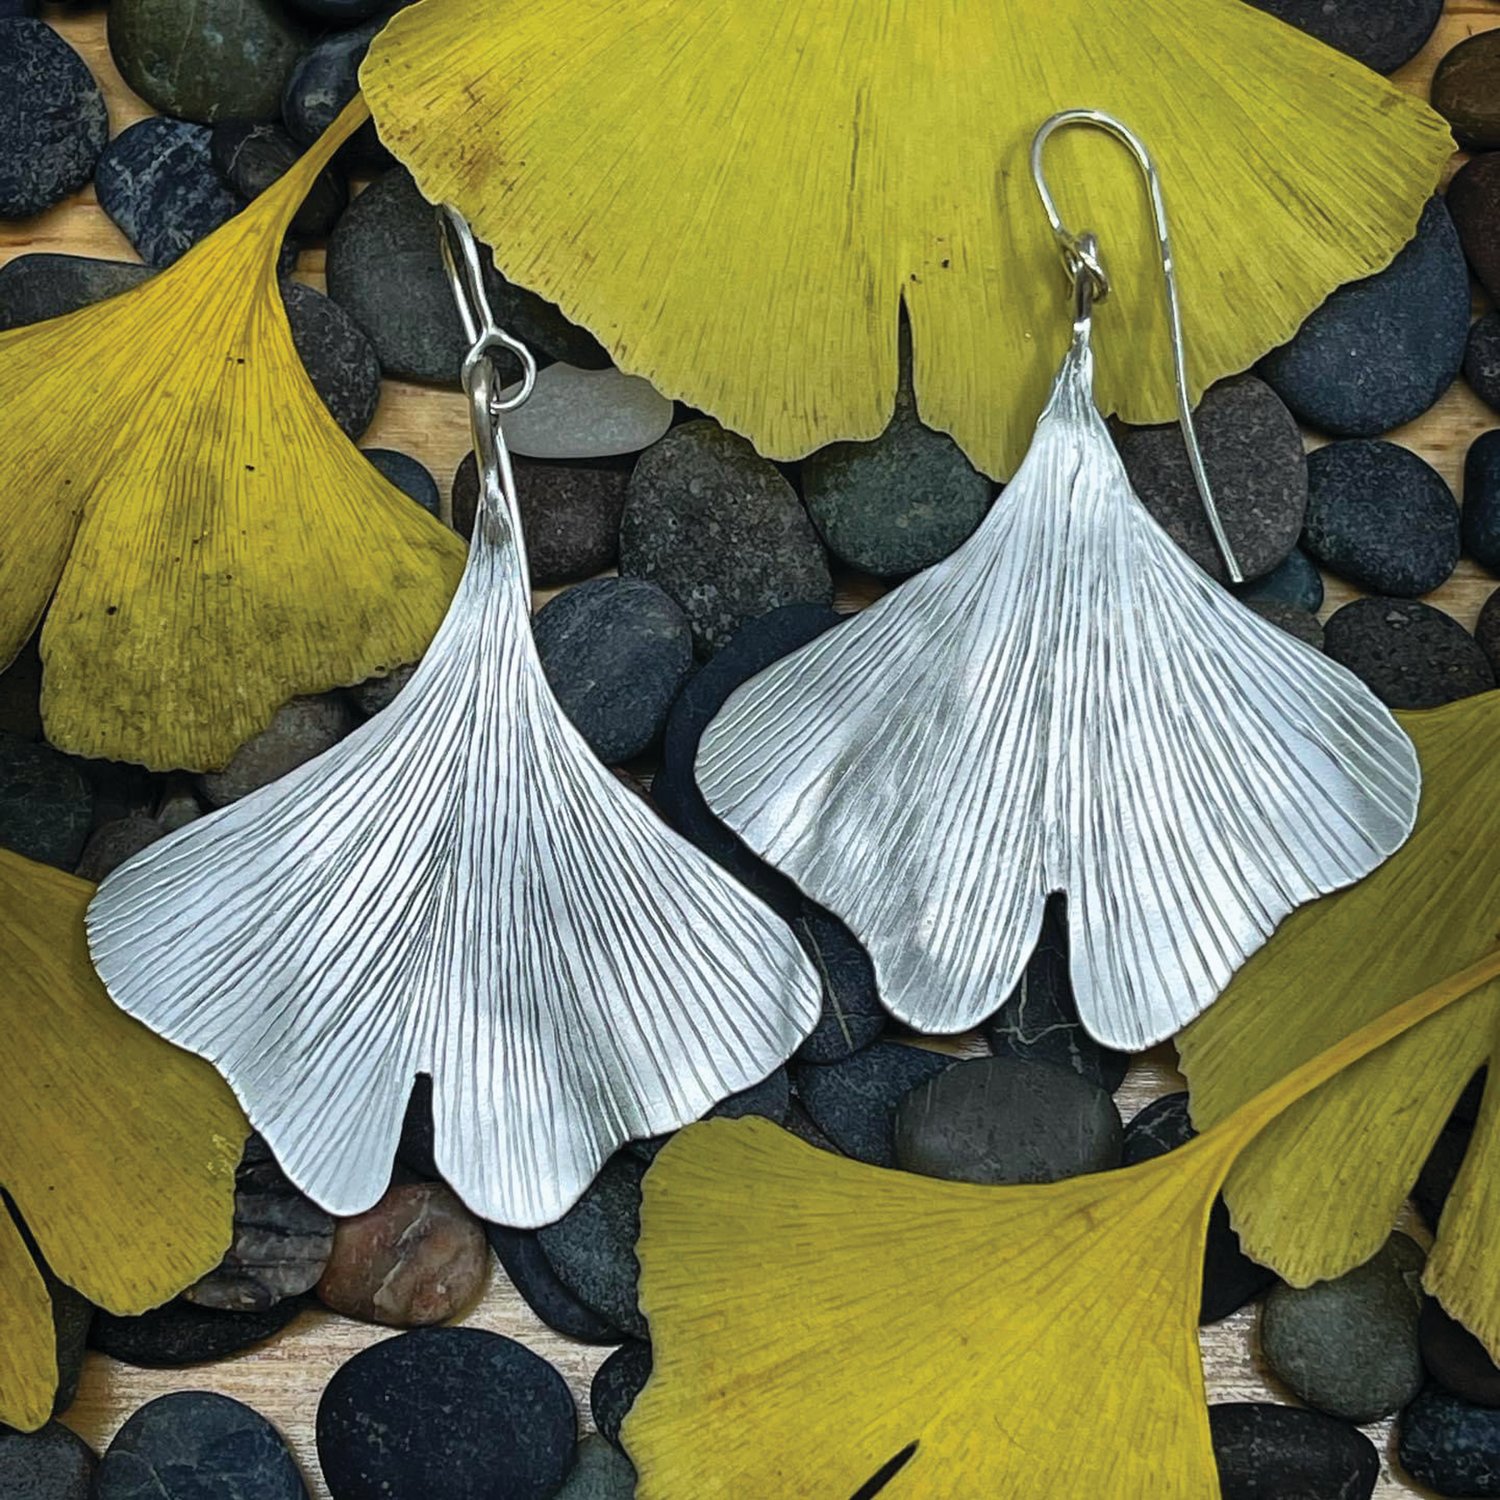 Earrings by Andrea Guarino-Slemmons. The Port Townsend Gallery will showcase art jewelry by Guarino-Slemmons in December.